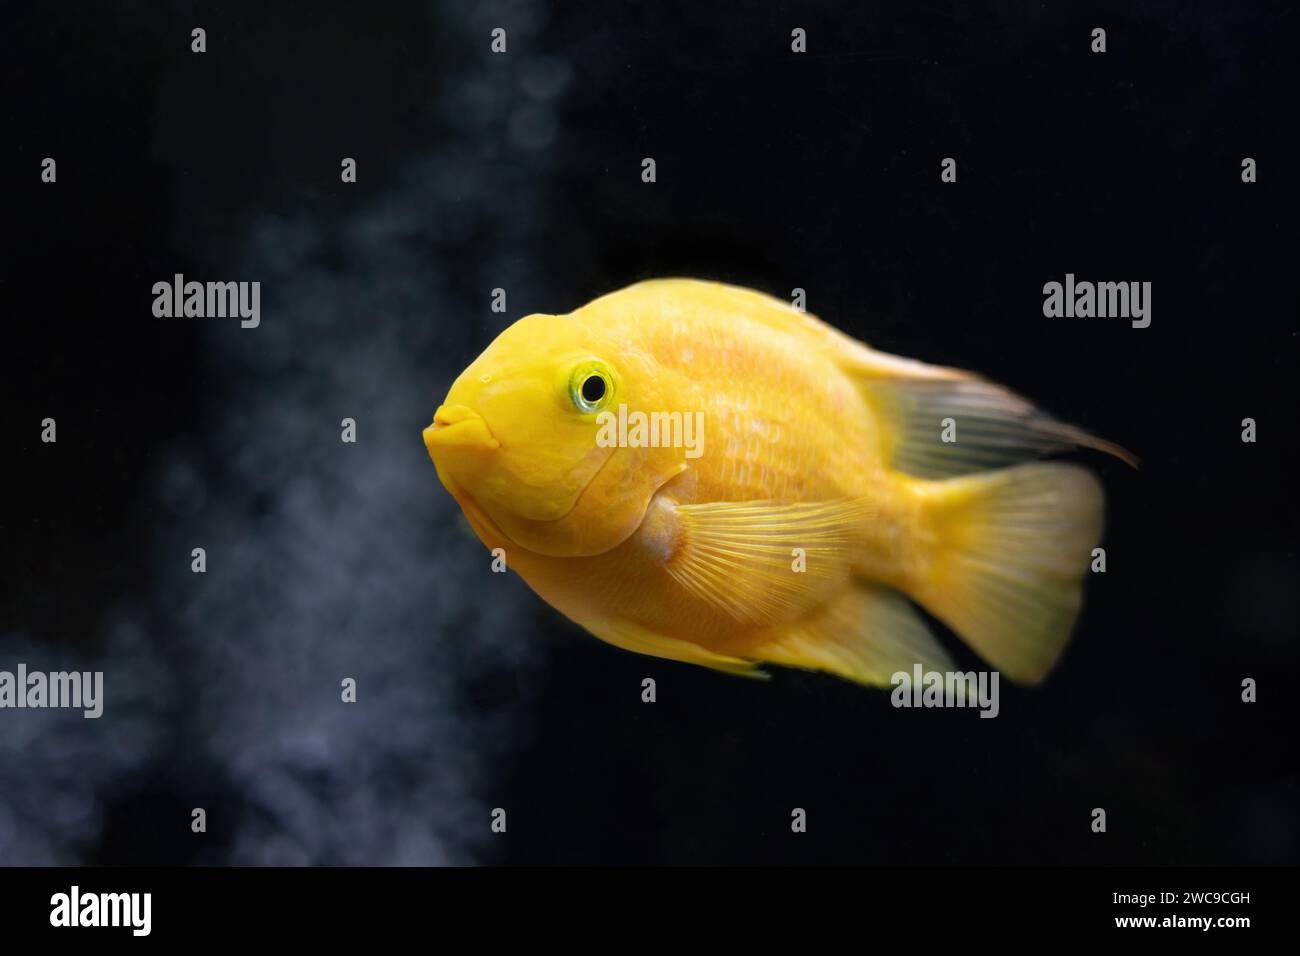 Yellow Parrot Cichlid fish looking at the camera. Close-up of Blood Parrot Cichlid fish on Black background. Stock Photo